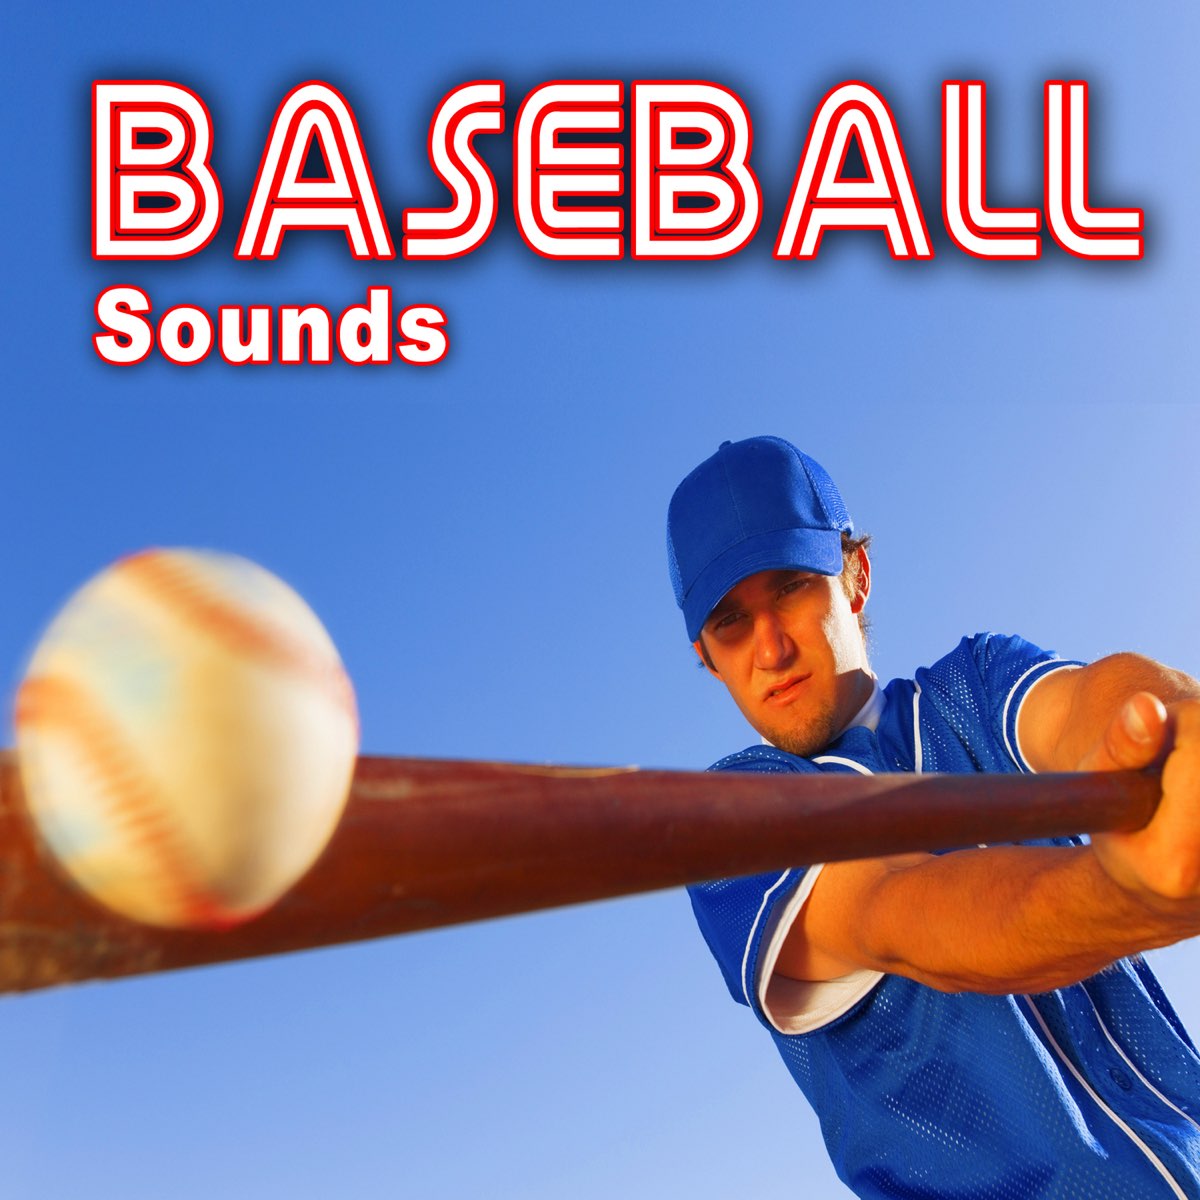 Baseball Sound Effects by Sound Ideas on Apple Music